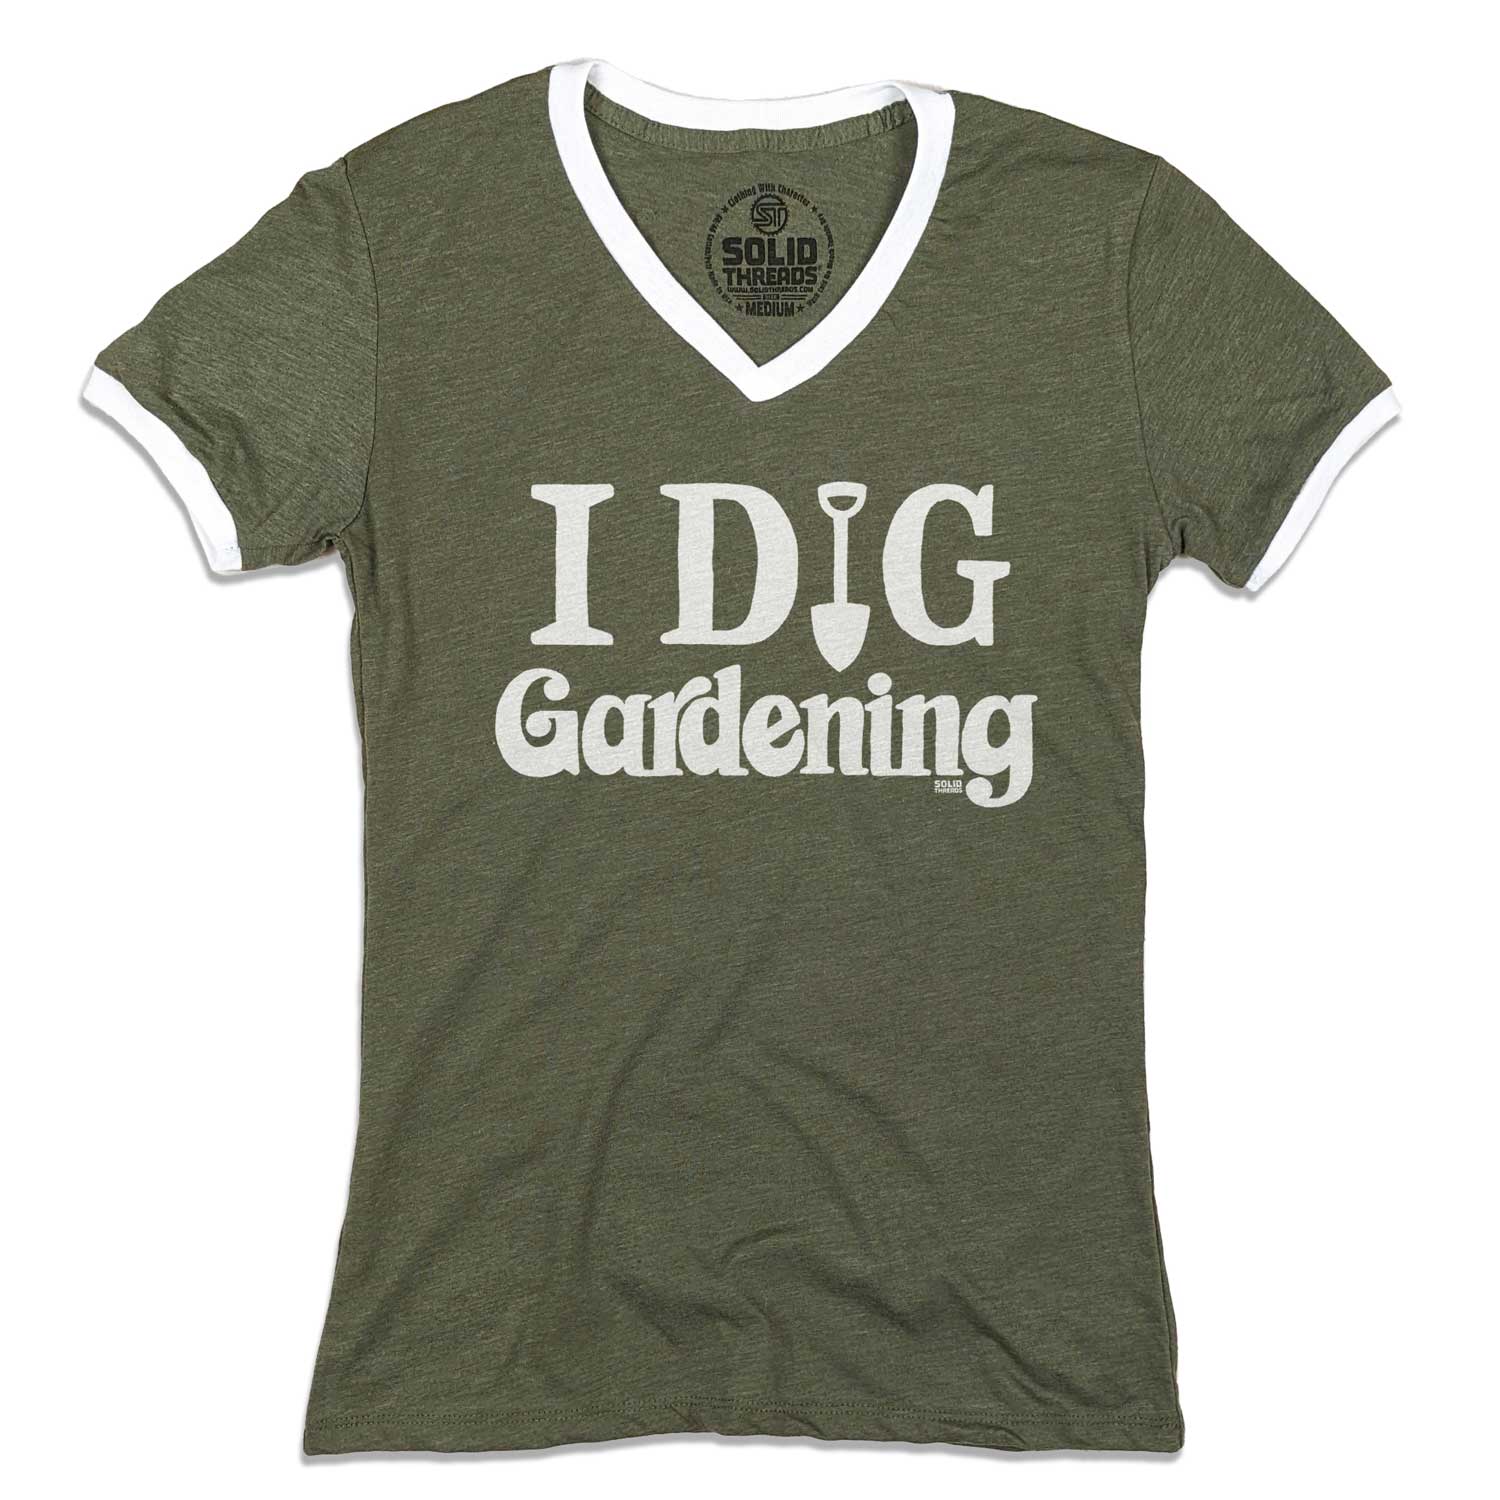 Women's I Dig Gardening Vintage Graphic V-Neck Tee | Funny Gardening T-shirt | Solid Threads